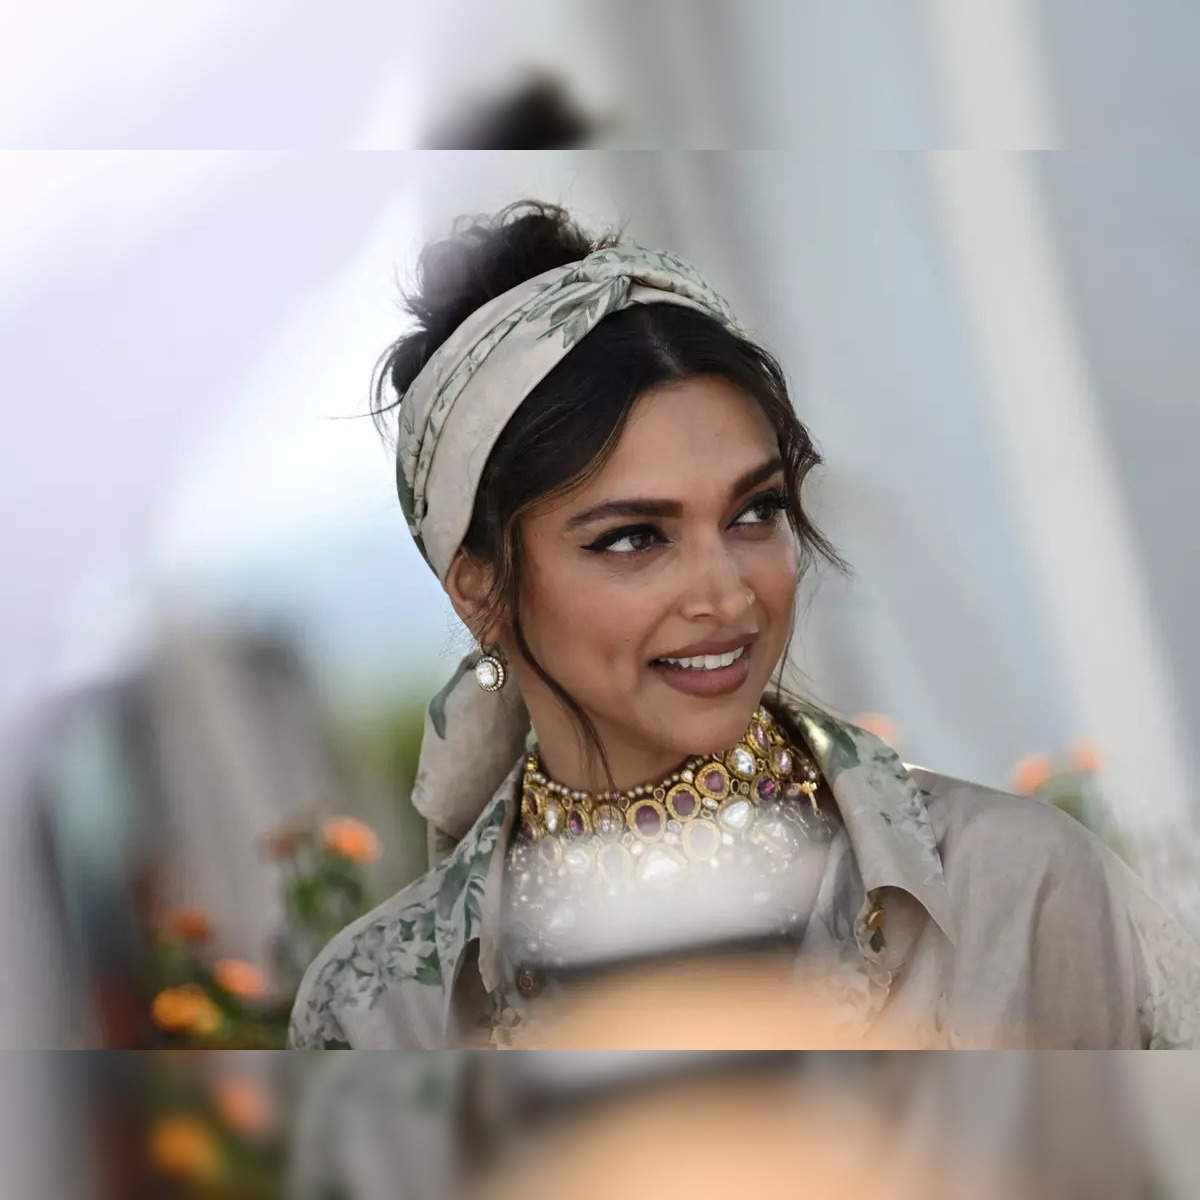 All the details on Deepika Padukone's Louis Vuitton outfit for the